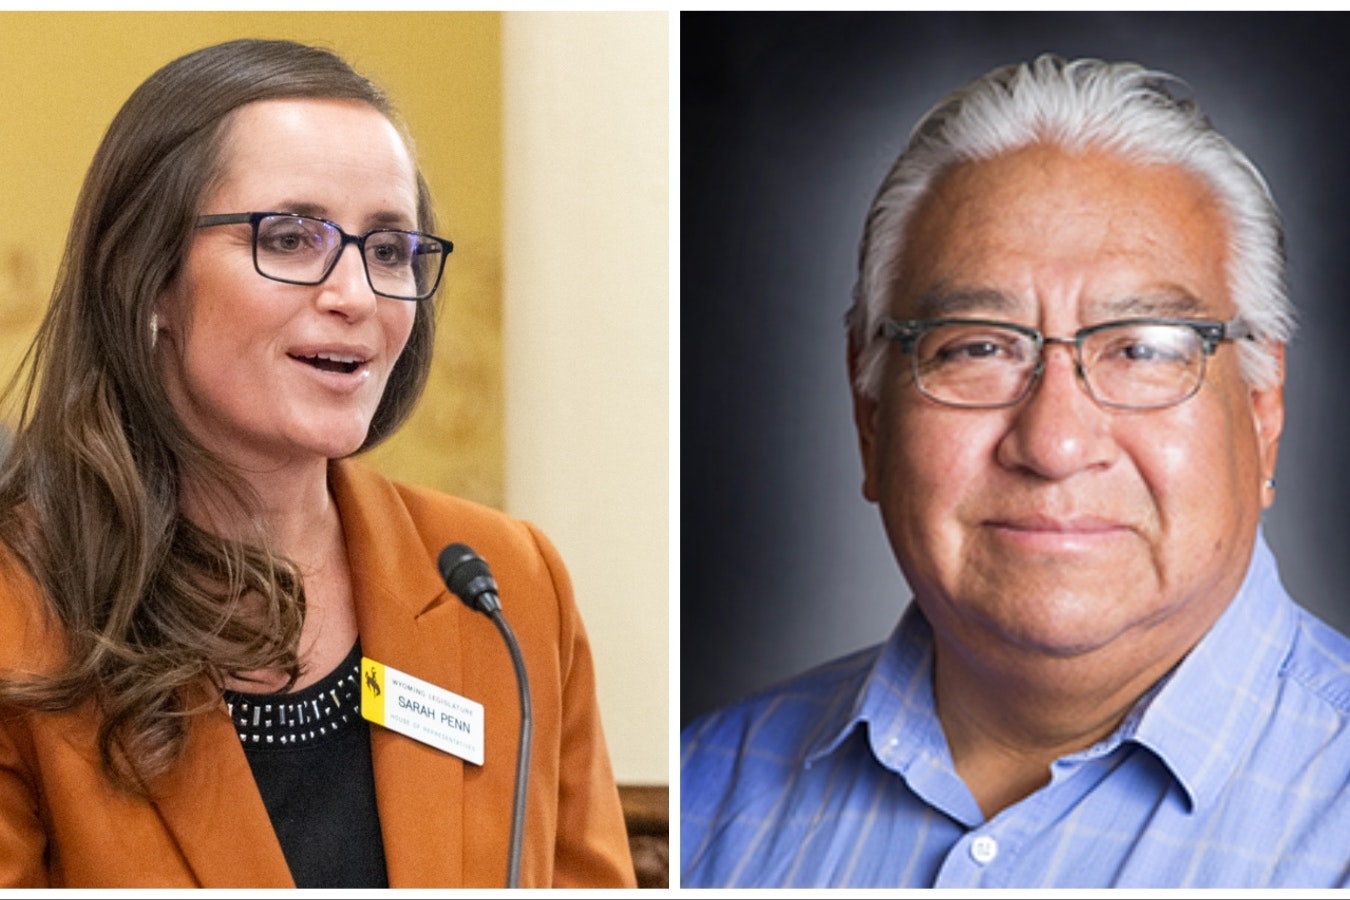 Ivan Posey of Fort Washakie, right, has announced he's running for the Wyoming Legislature for the House seat held by Rep. Sarah Penn, left.